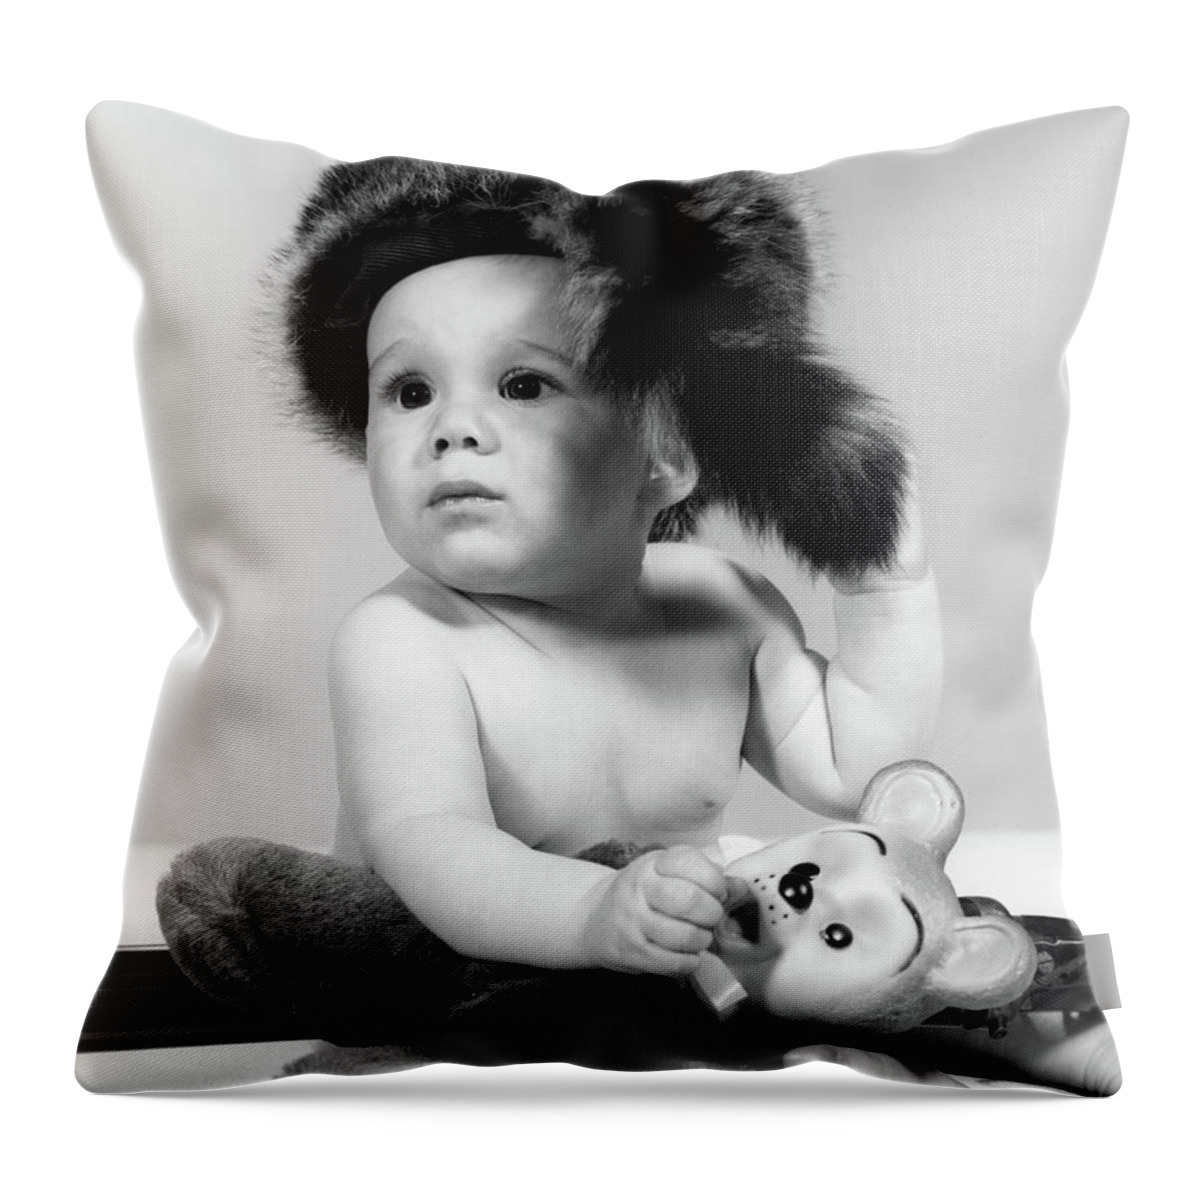 Photography Throw Pillow featuring the photograph 1960s Baby Wearing Coonskin Hat by Vintage Images